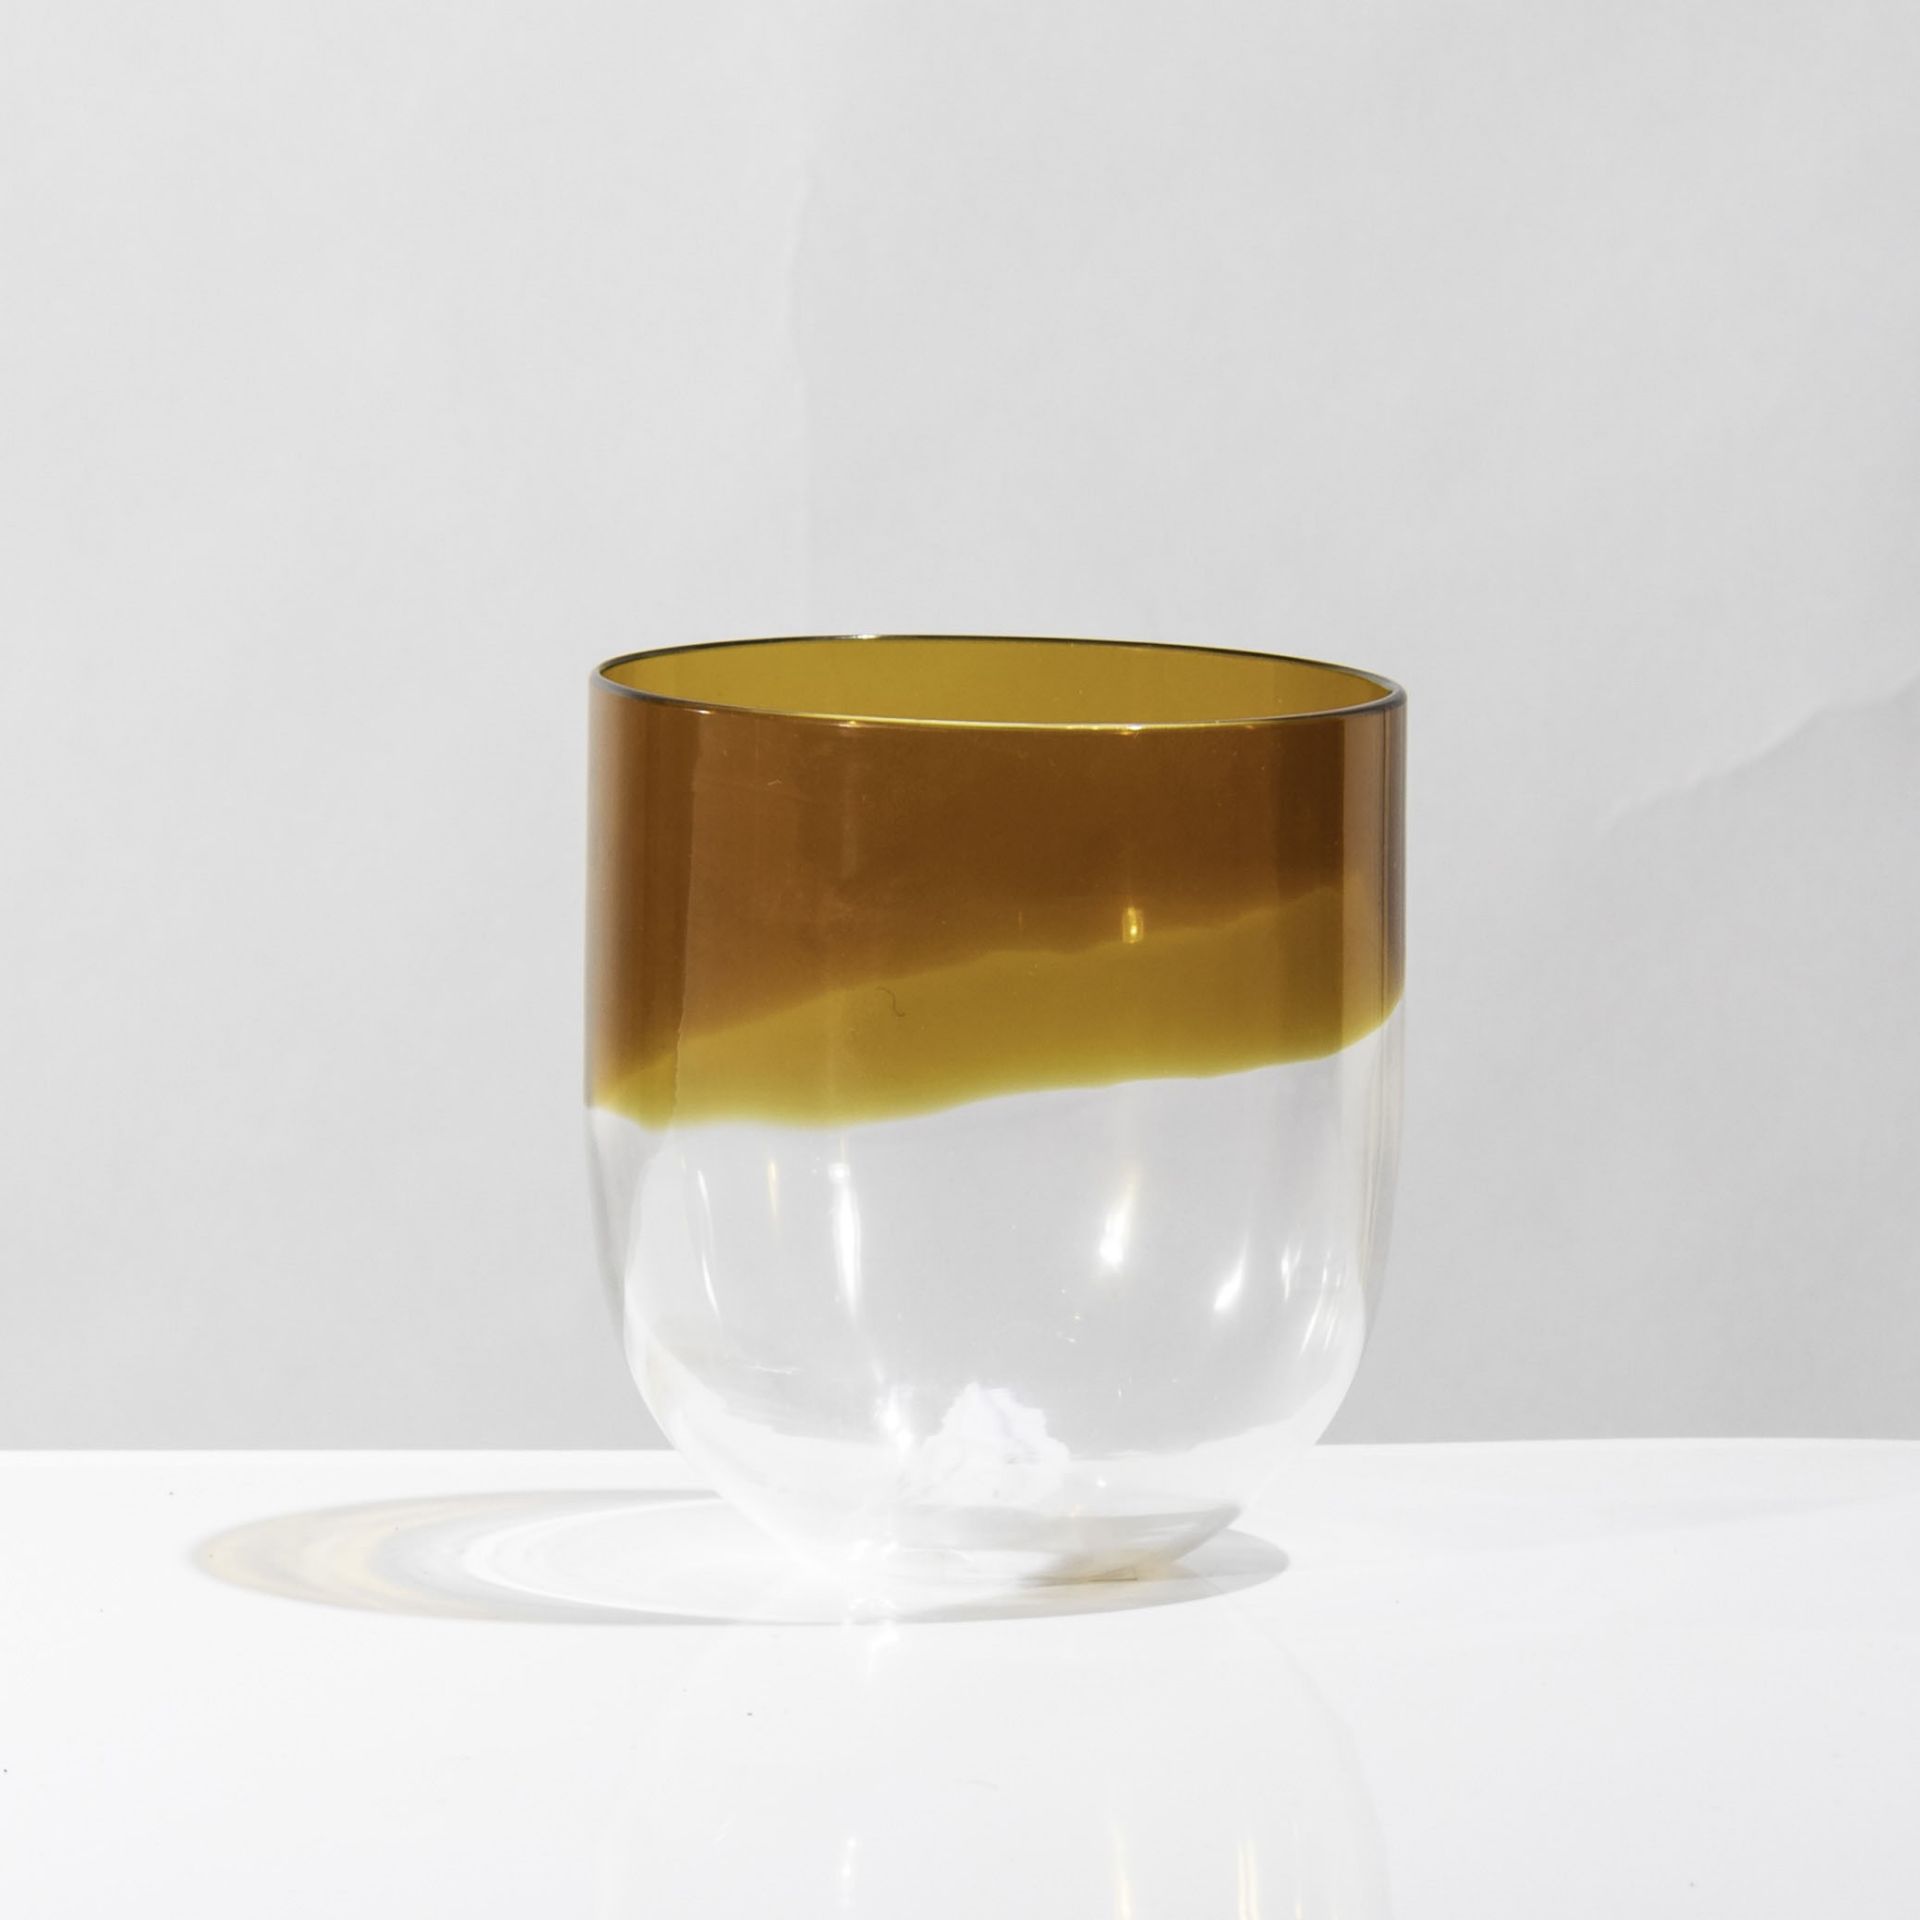 Venini, Murano, 1970 ca - A candleholder in blown glass with an amber band. Signed H [...]